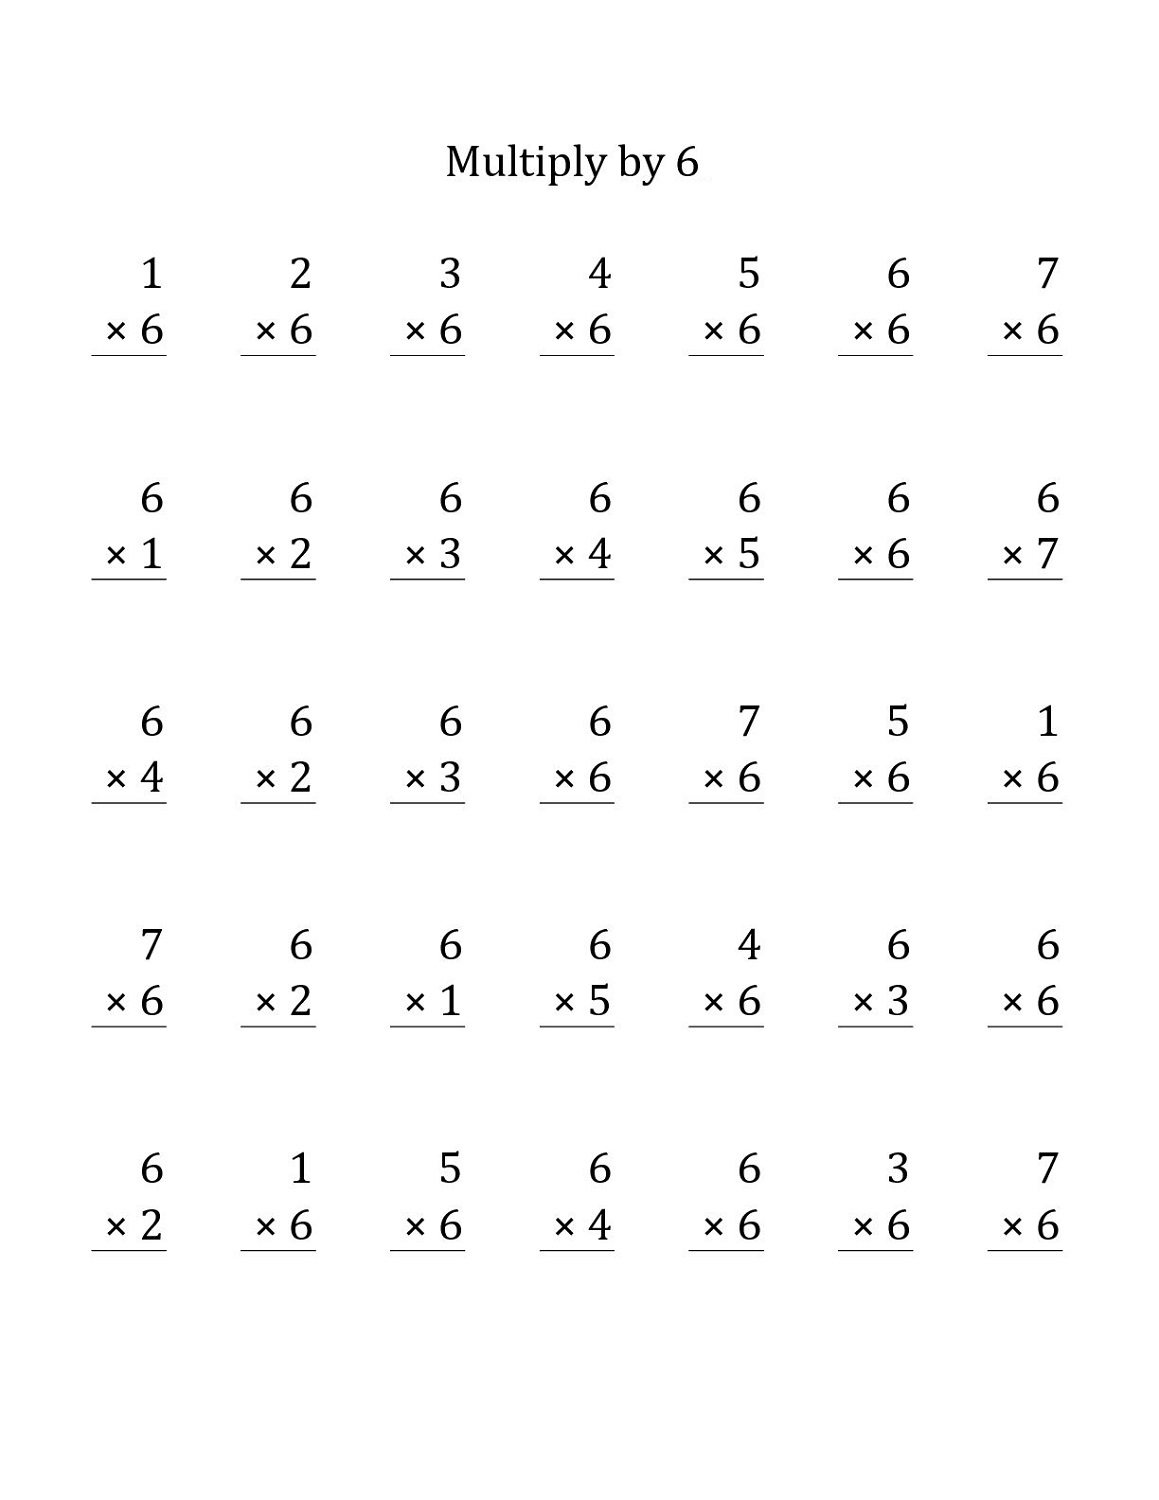 22 Times Table Worksheets  Activity Shelter For 6 Times Table Worksheet